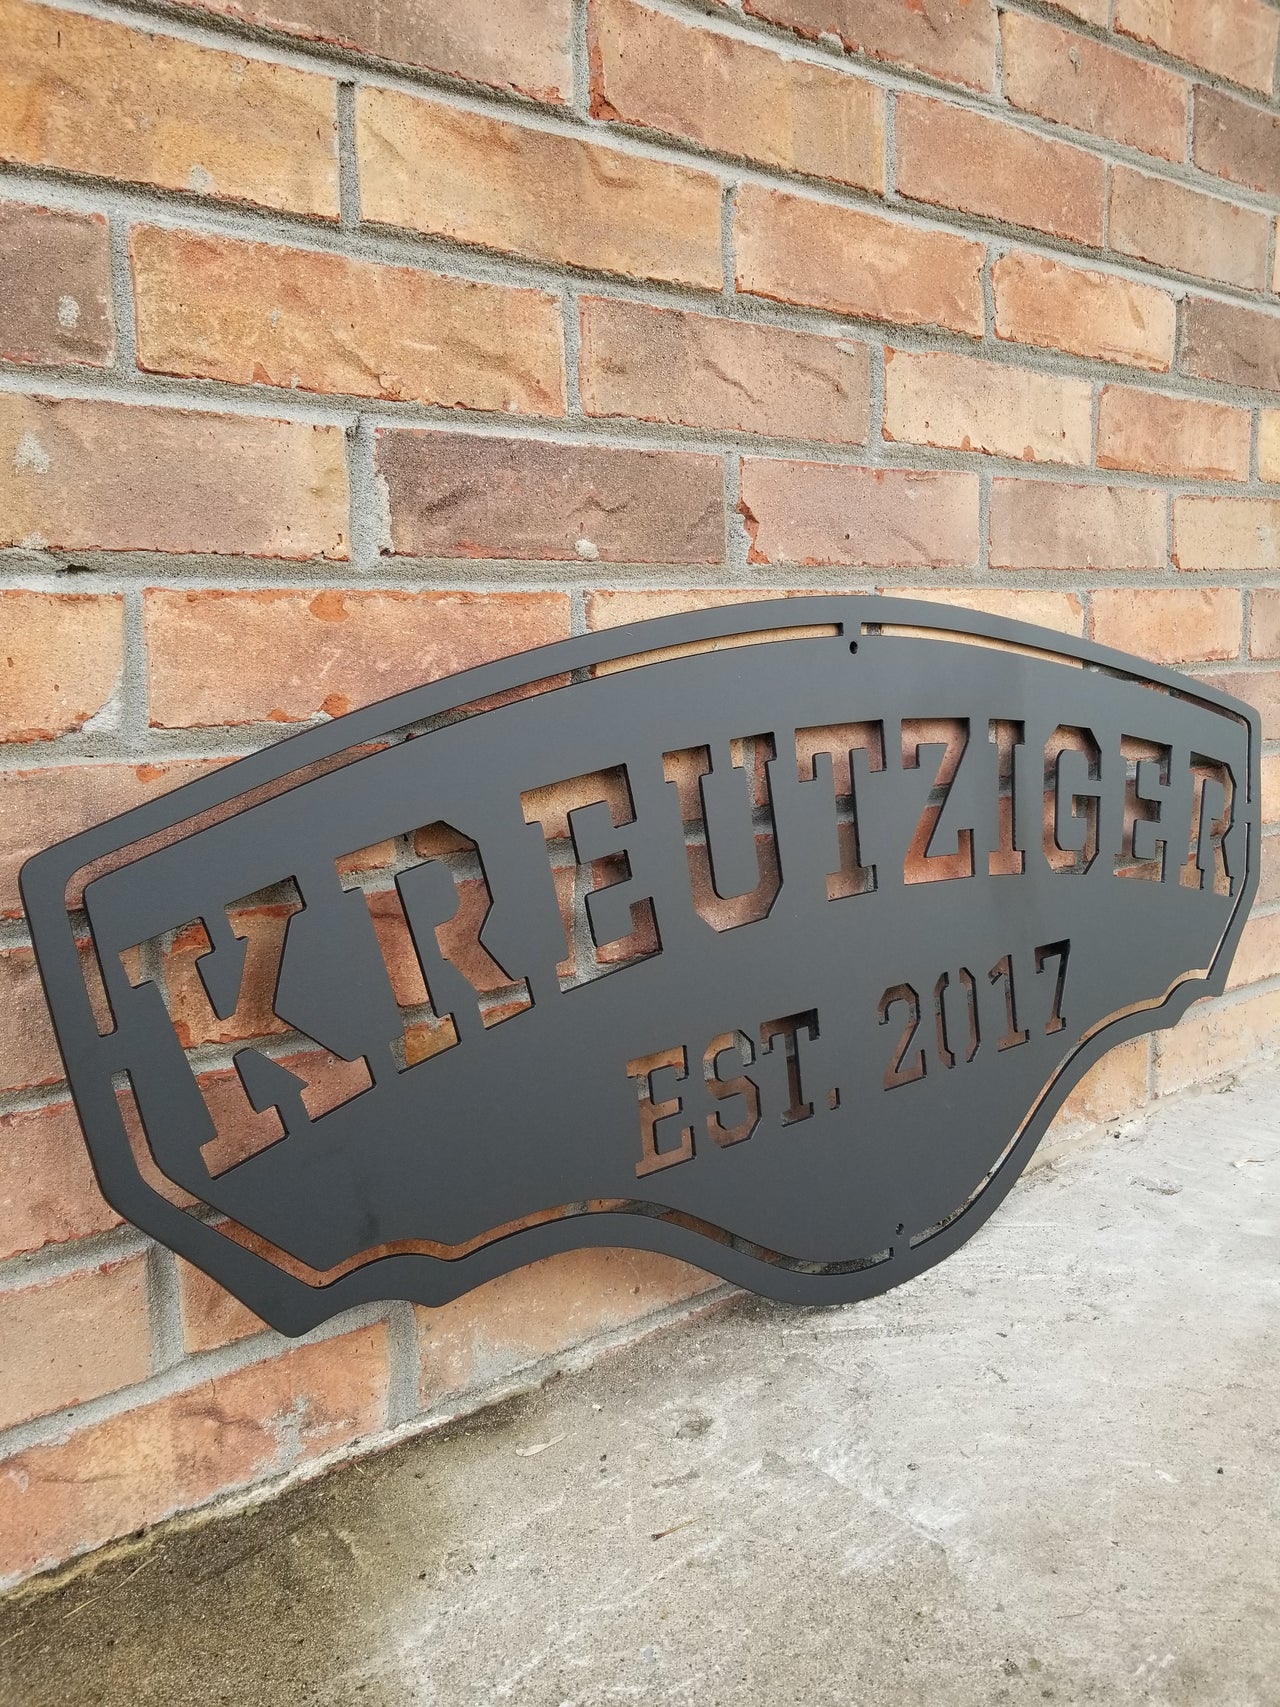 This personalized metal sign reads, "KREUTZIGER Est. 2017".